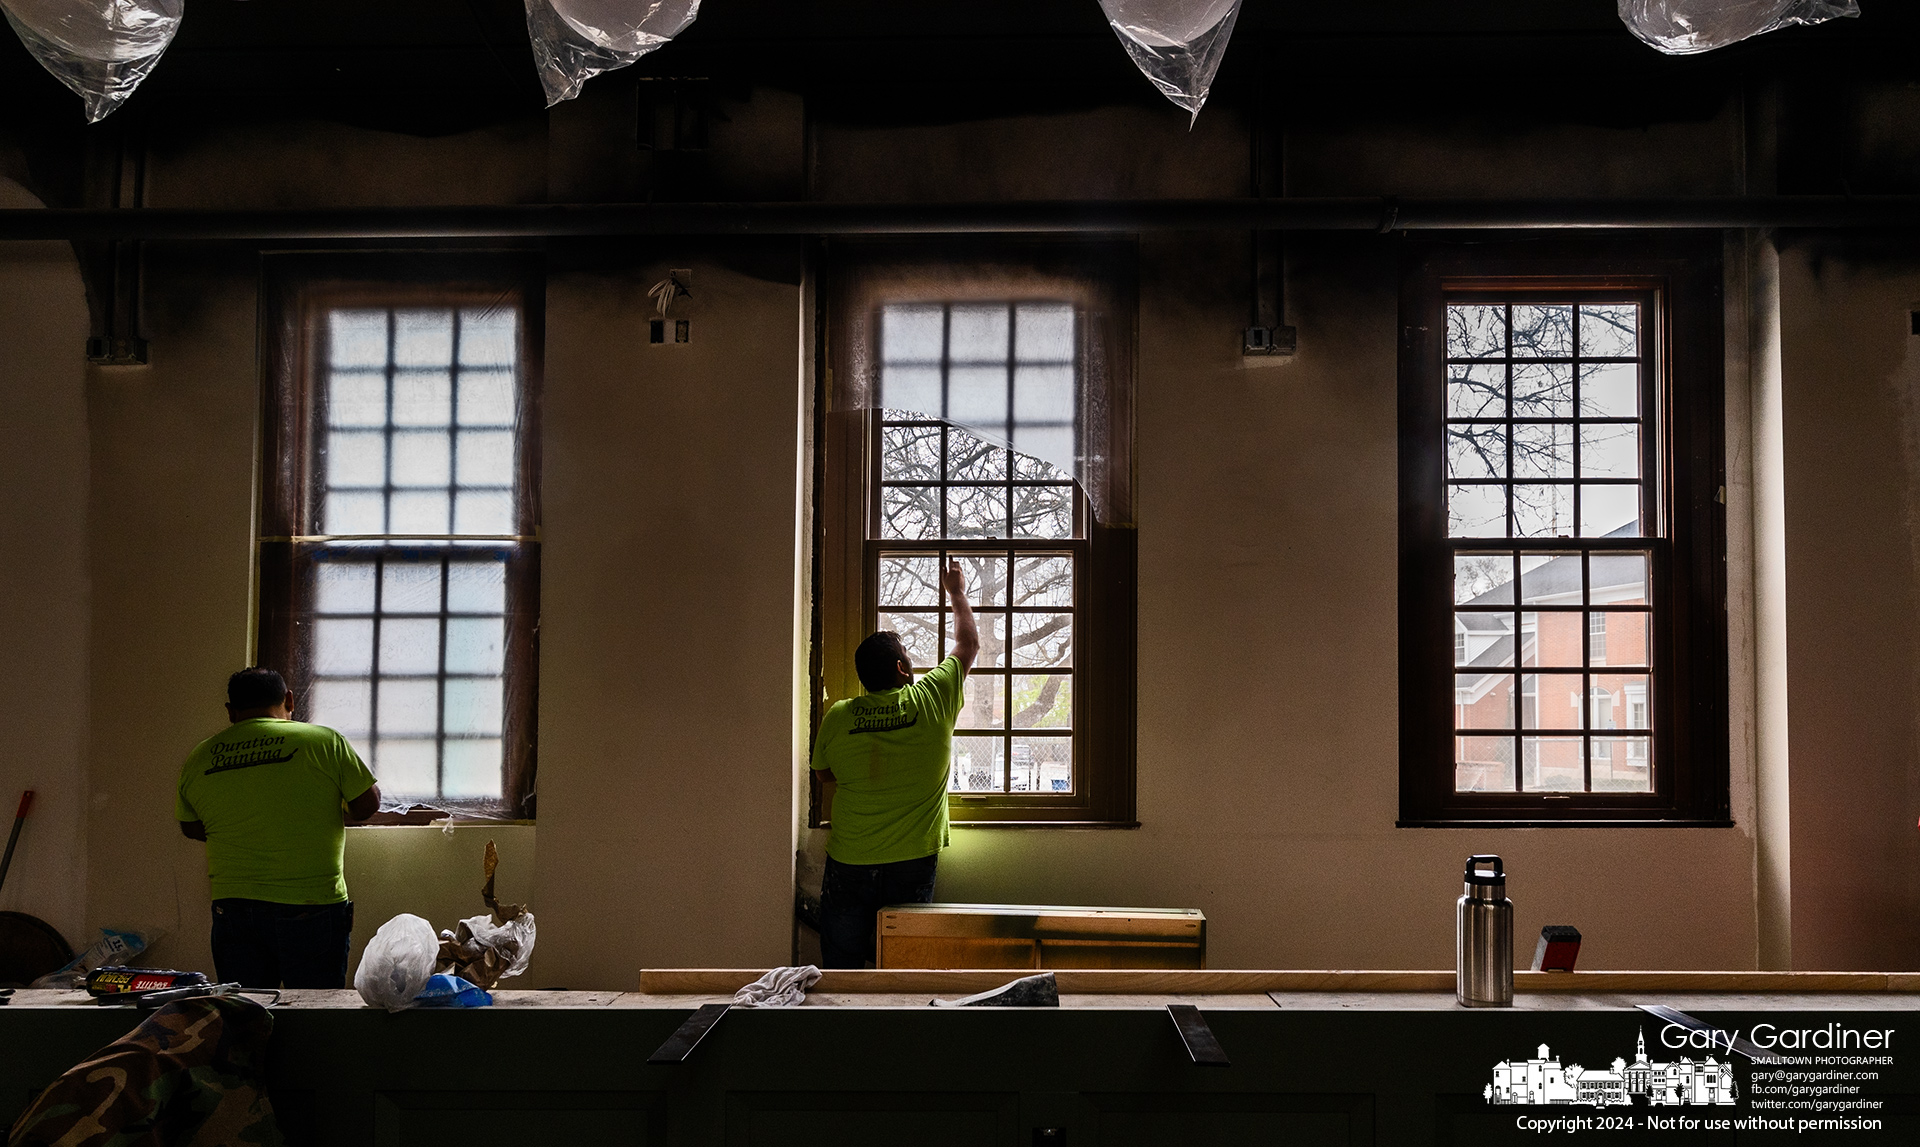 Workers remove plastic sheets taped to windows inside the High Bank Distillery restaurant to keep the windows from overspray during painting. My Final Photo for April 9, 2024.